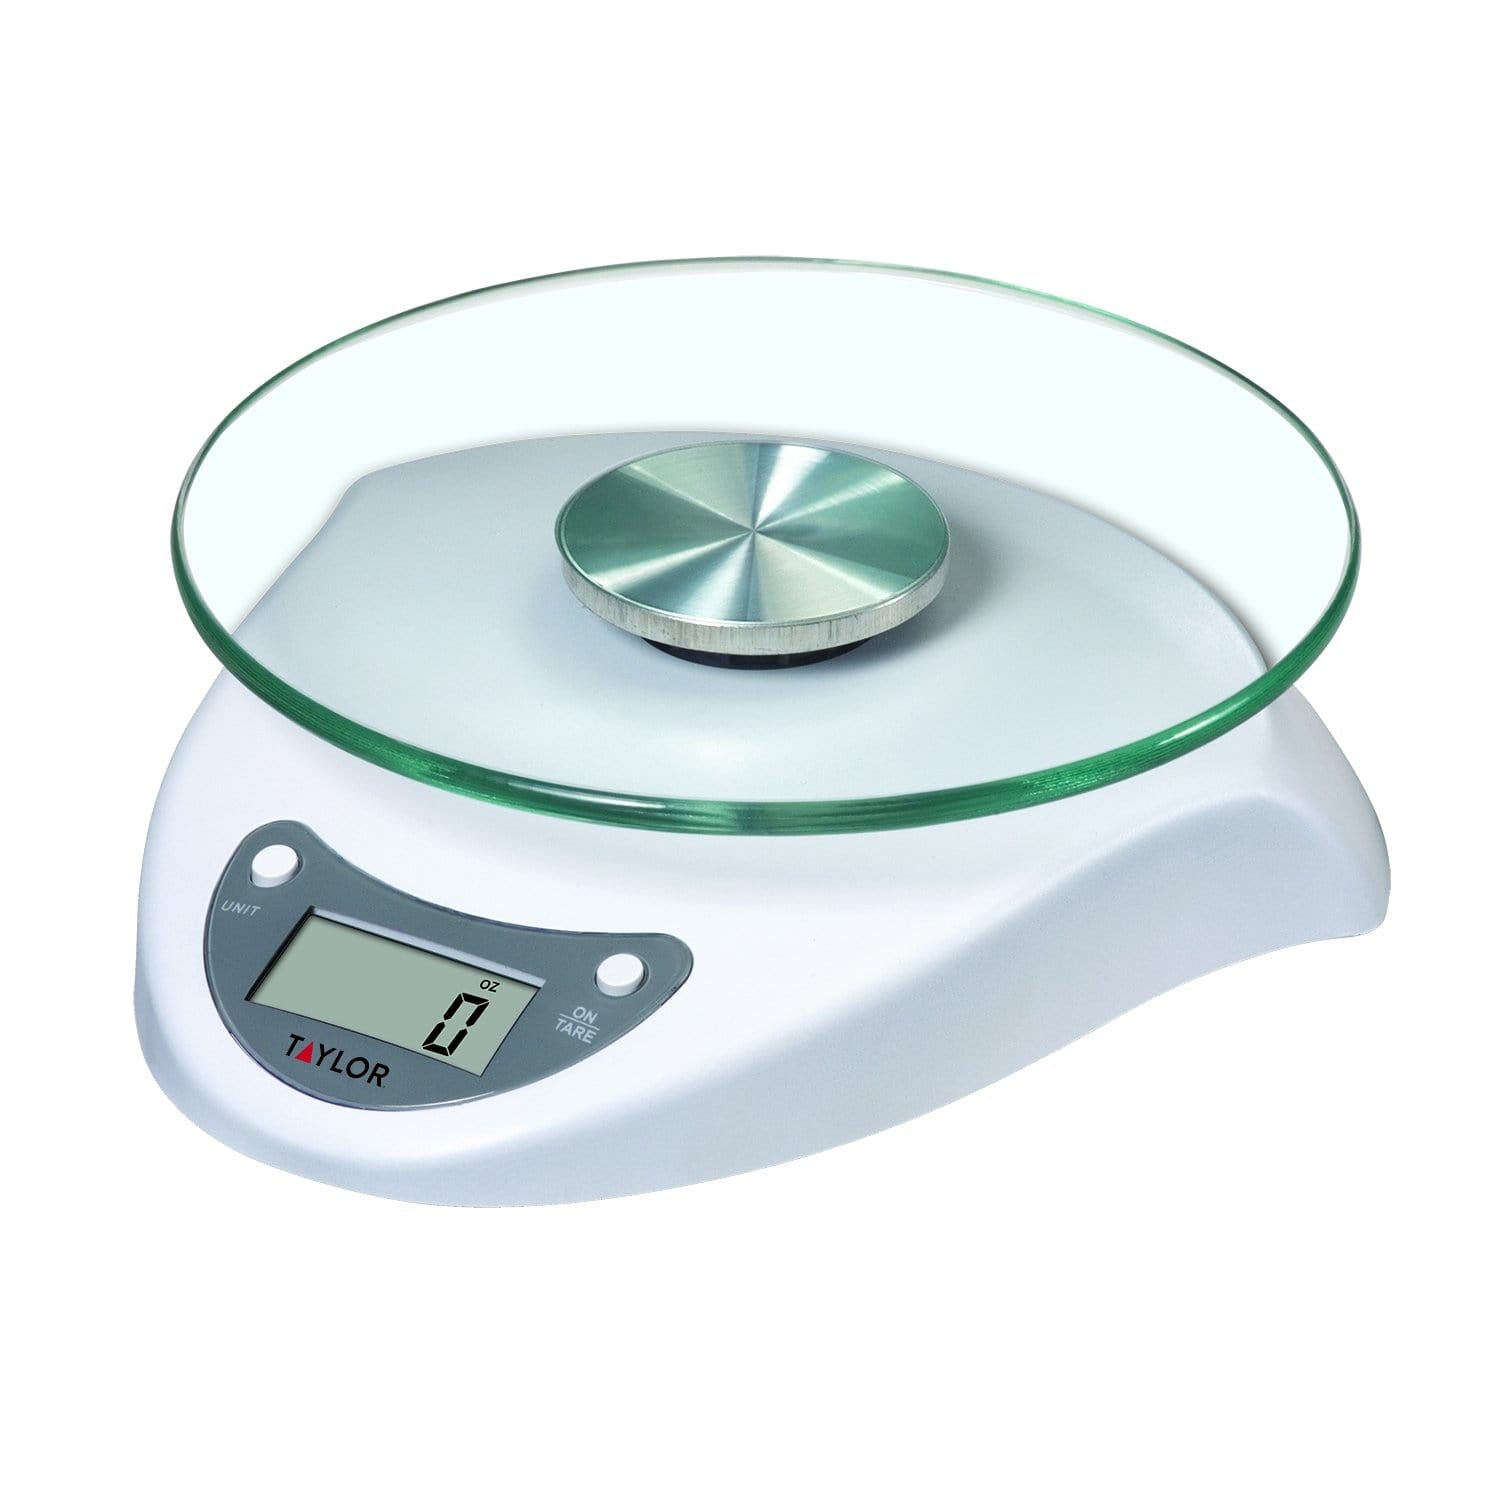 The Best Digital Scales